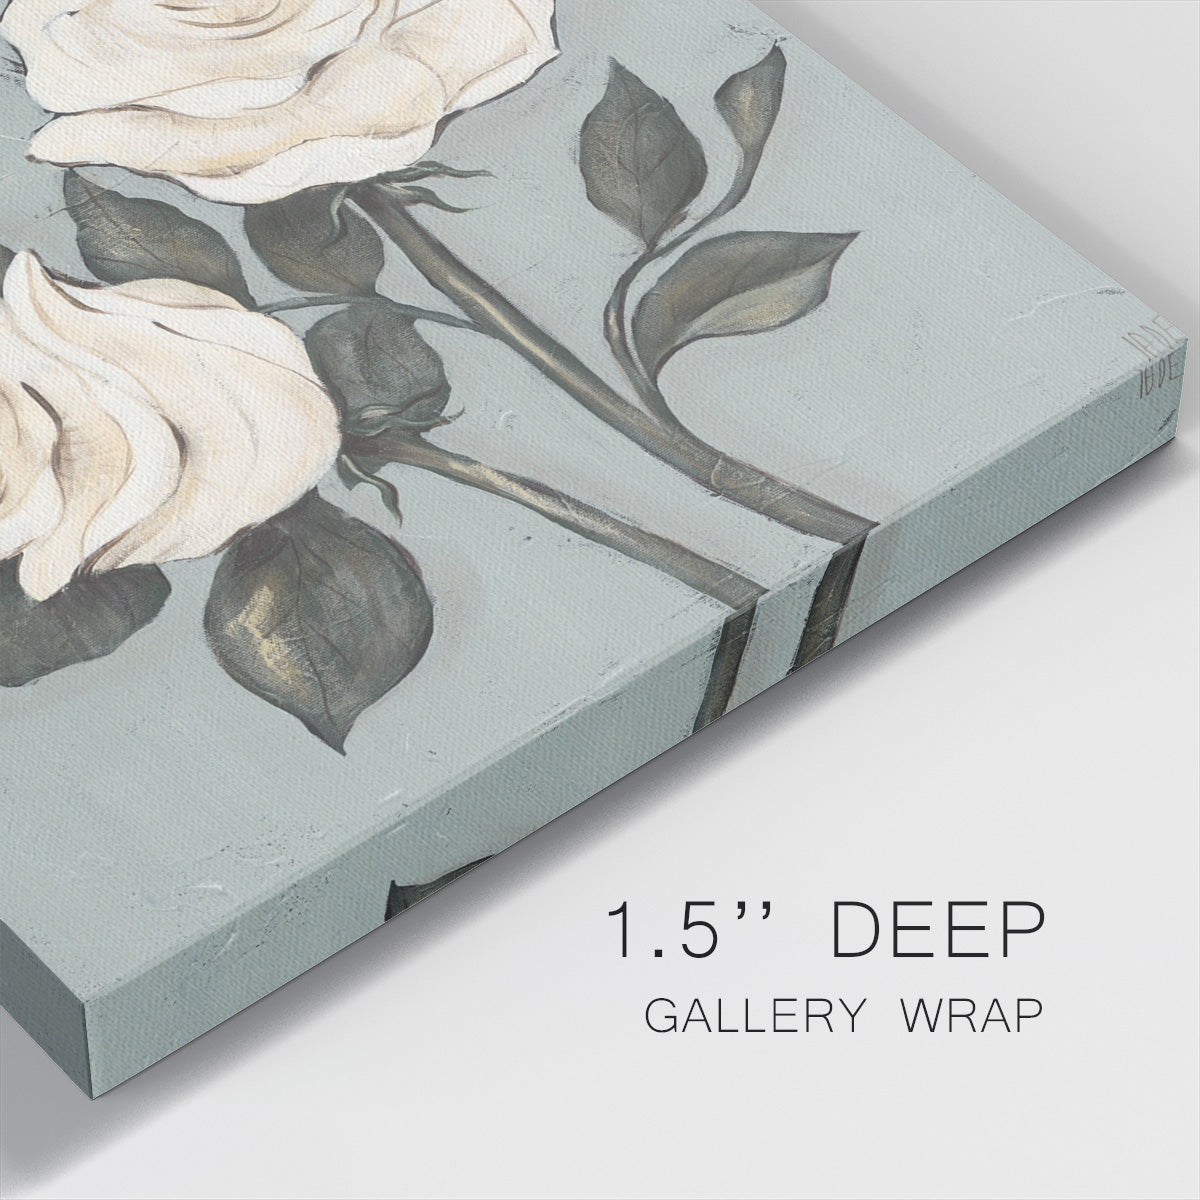 Two Tan Roses-Premium Gallery Wrapped Canvas - Ready to Hang